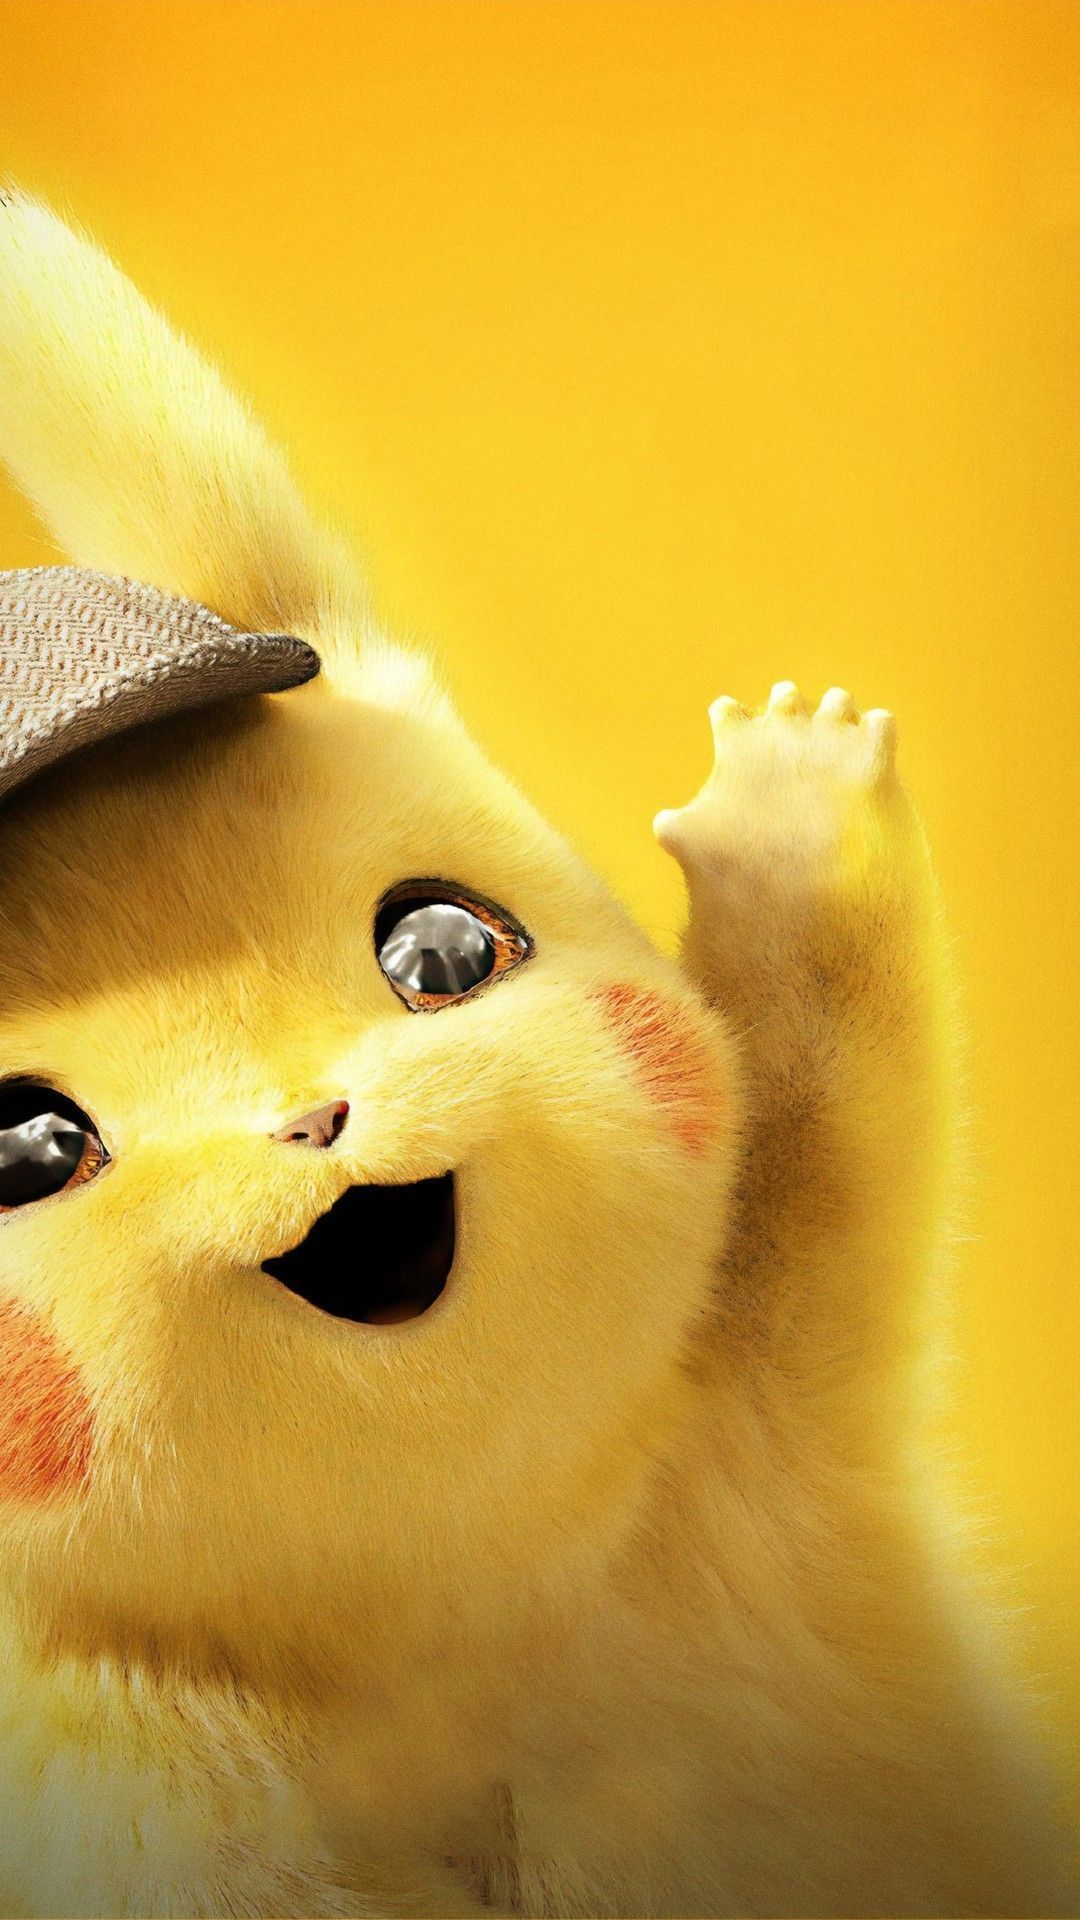 ✓[95+] Pokémon Detective Pikachu Wallpaper for iPhone 7. 2019 Cute -  Android / iPhone HD Wallpaper Background Download (png / jpg) (2023)